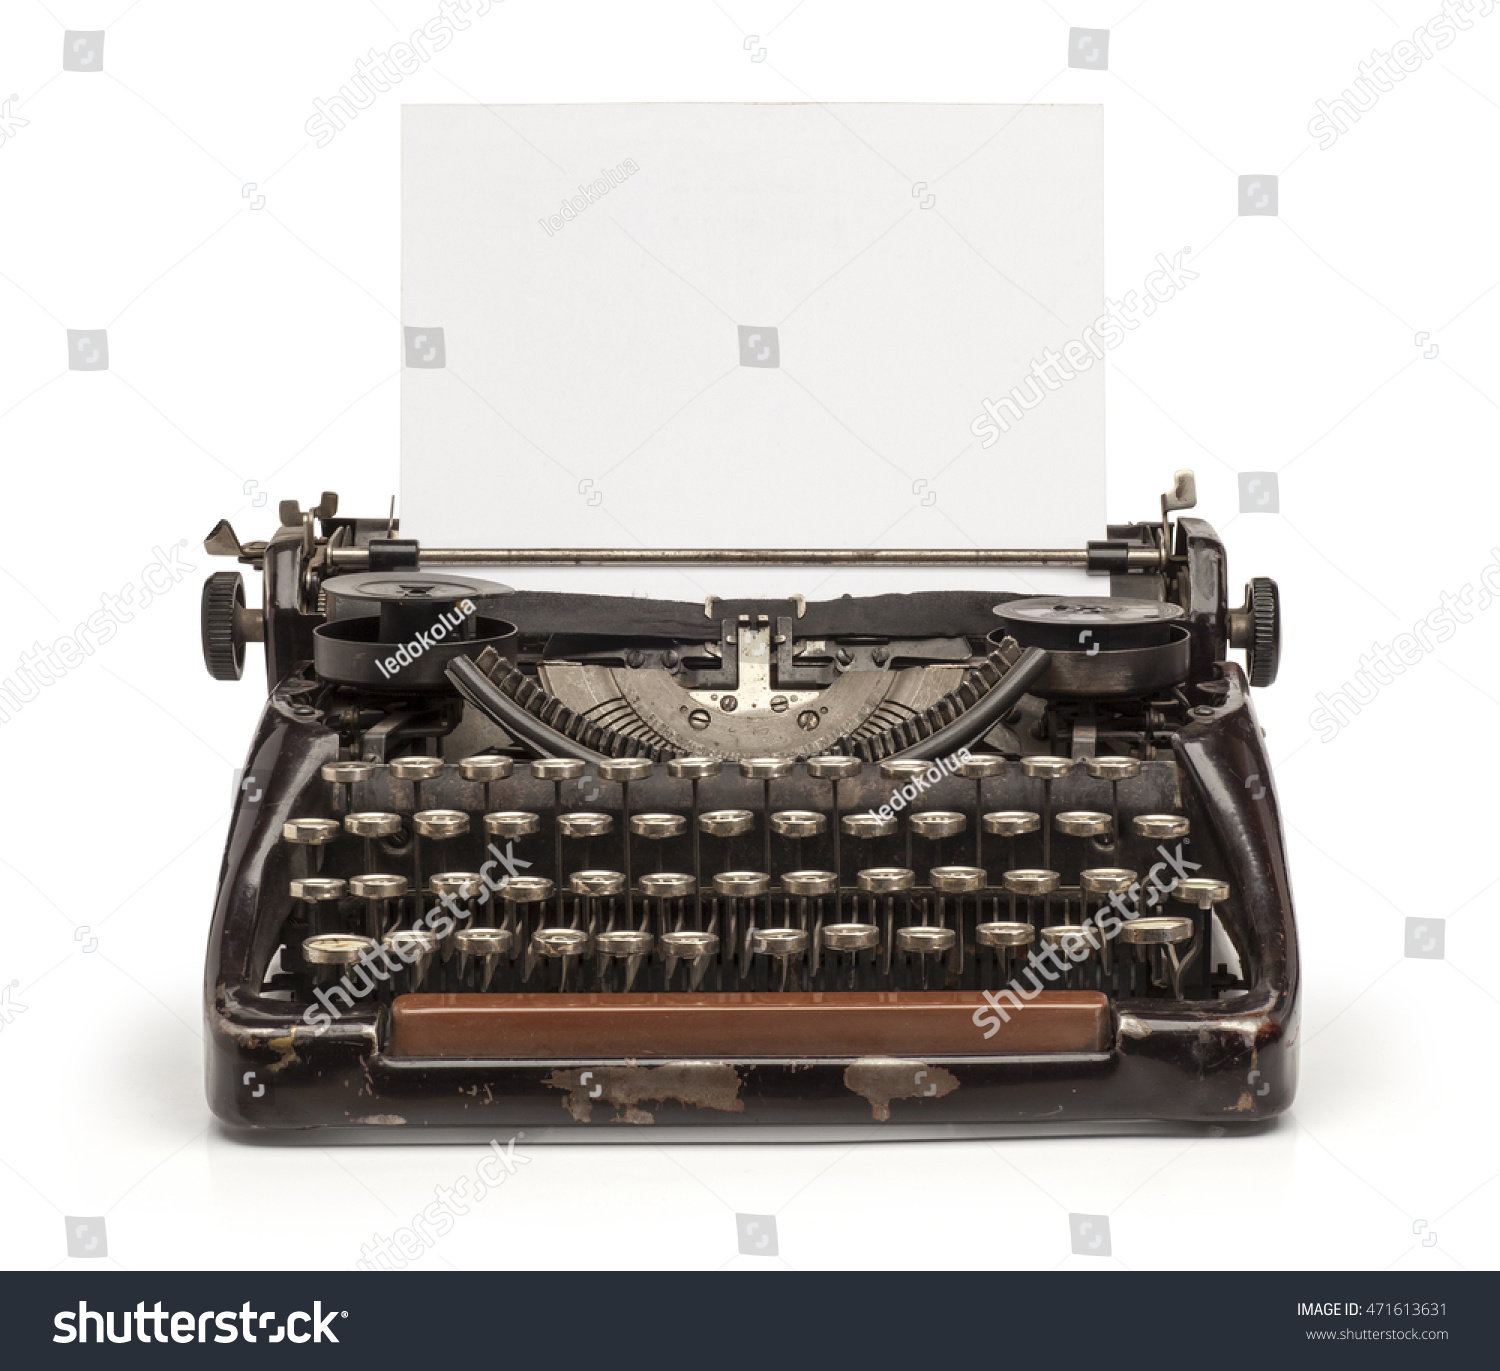 Old vintage typewriter and a blank sheet of paper inserted. Isolated on white background.

 #471613631